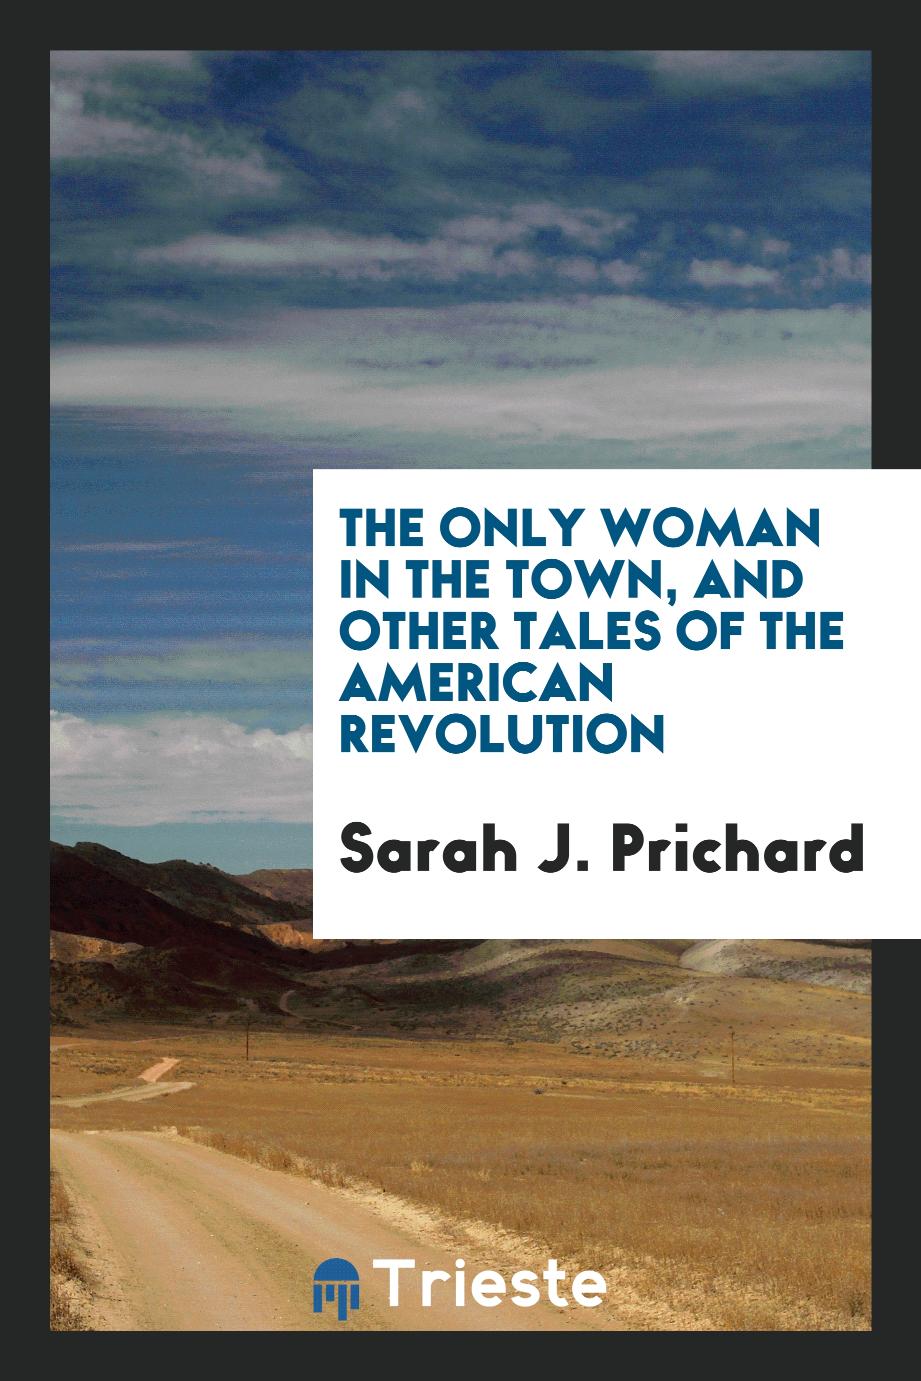 The only woman in the town, and other tales of the American Revolution